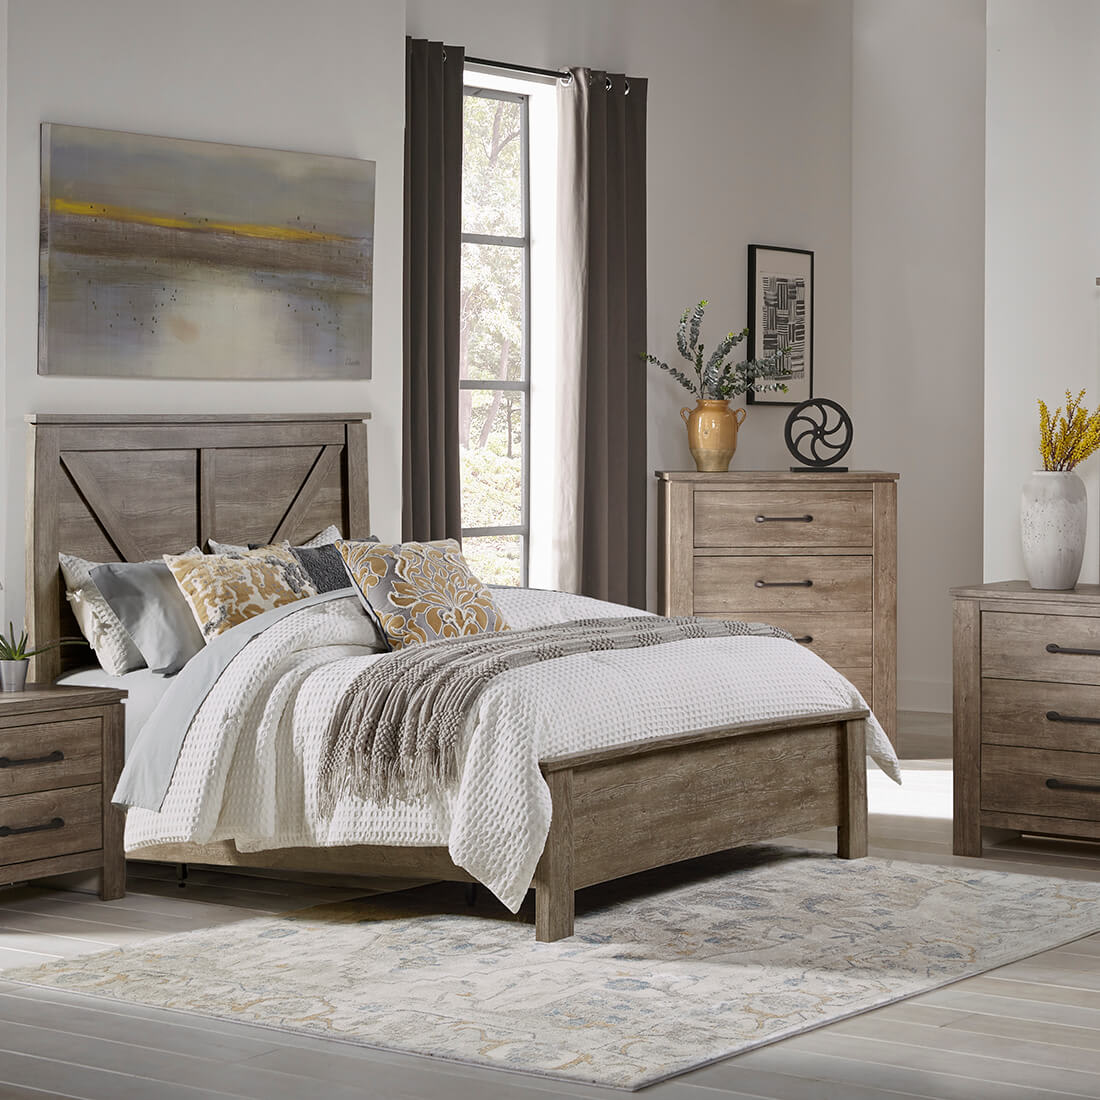 Adorna Collection 3pc King Bedroom Set, Home Styles The Aspen Collection King Bed